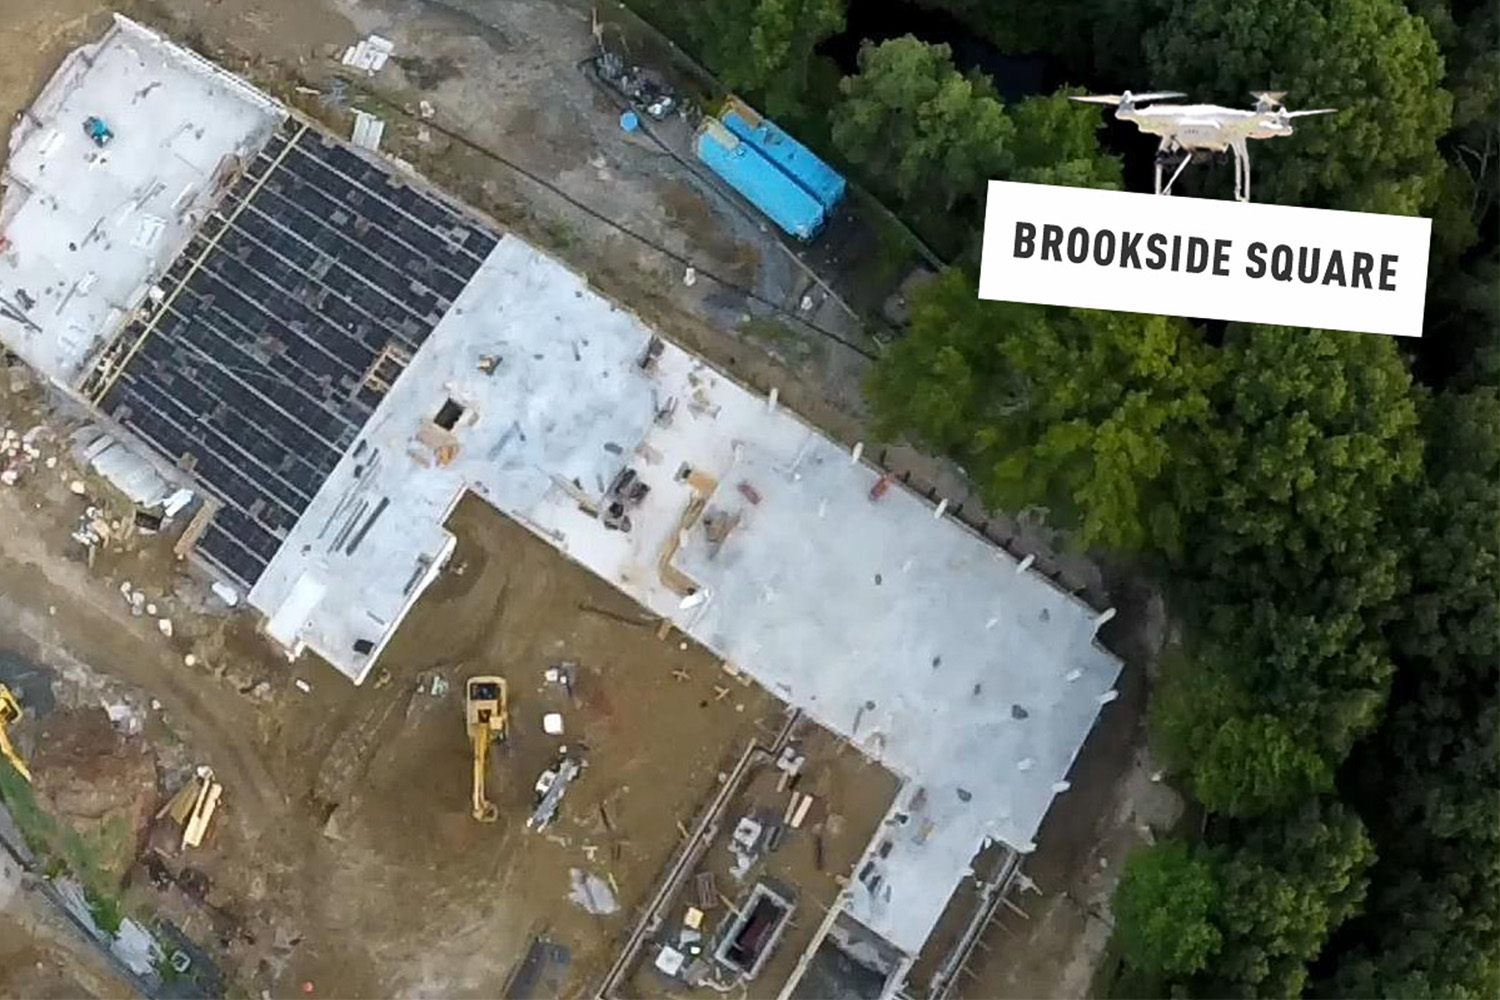 aerial view of Brookside Square, with drone holding a "Brookside Square" sign 